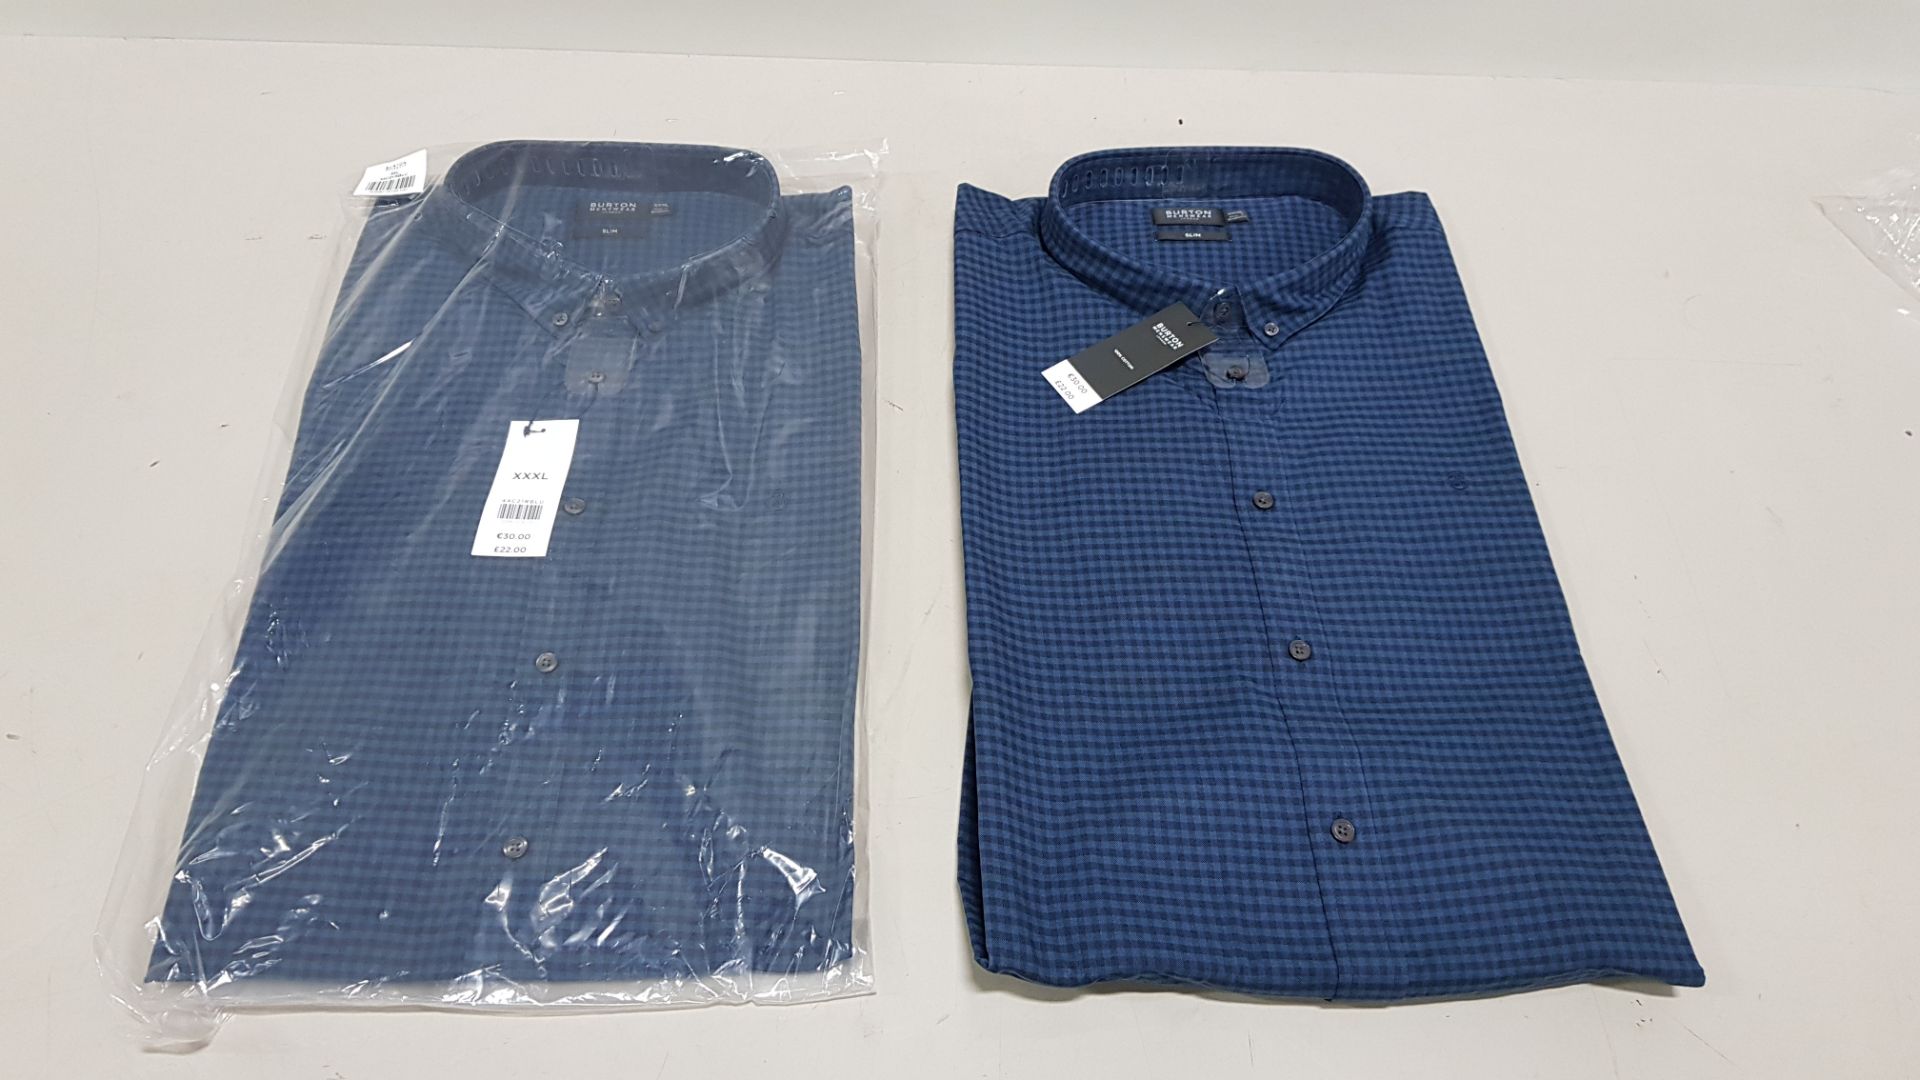 20 X BRAND NEW BURTON MENSWEAR BLUE CHECK SHIRTS IN SIZES UK 3 AND 5XL RRP-£22.00 PP